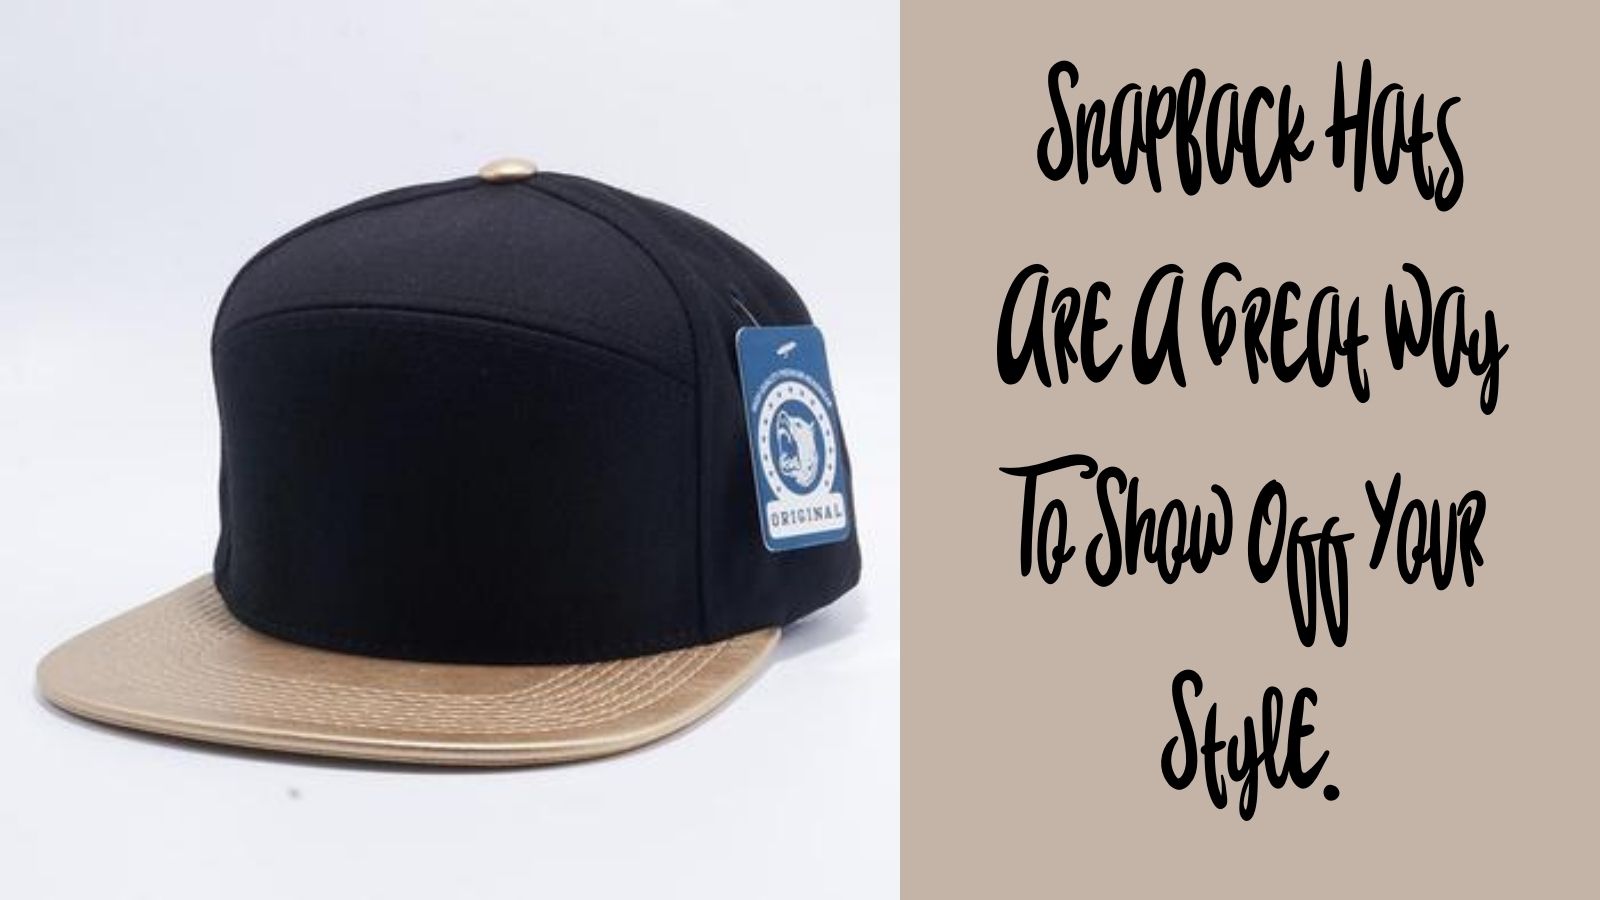 Snapback Hats Are A Great Way To Show Off Your Style.